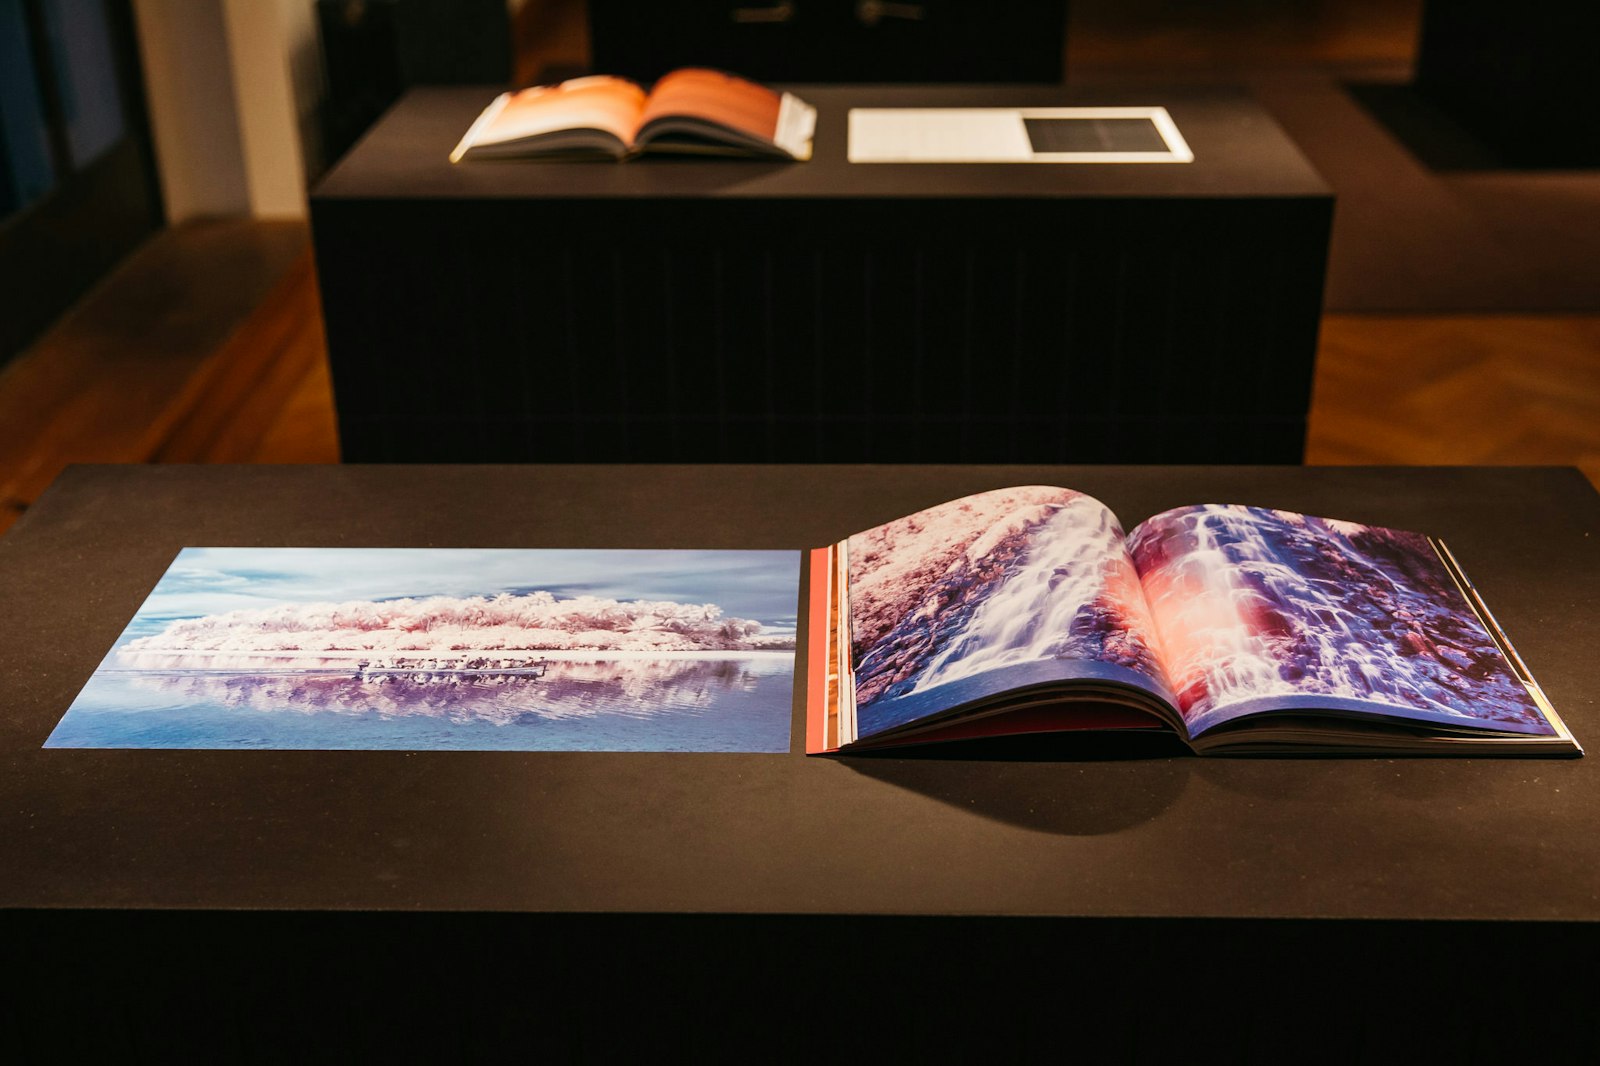 The book The Island of the Colorblind, with photographs of Sanne De Wilde and design by Tim Bisschop